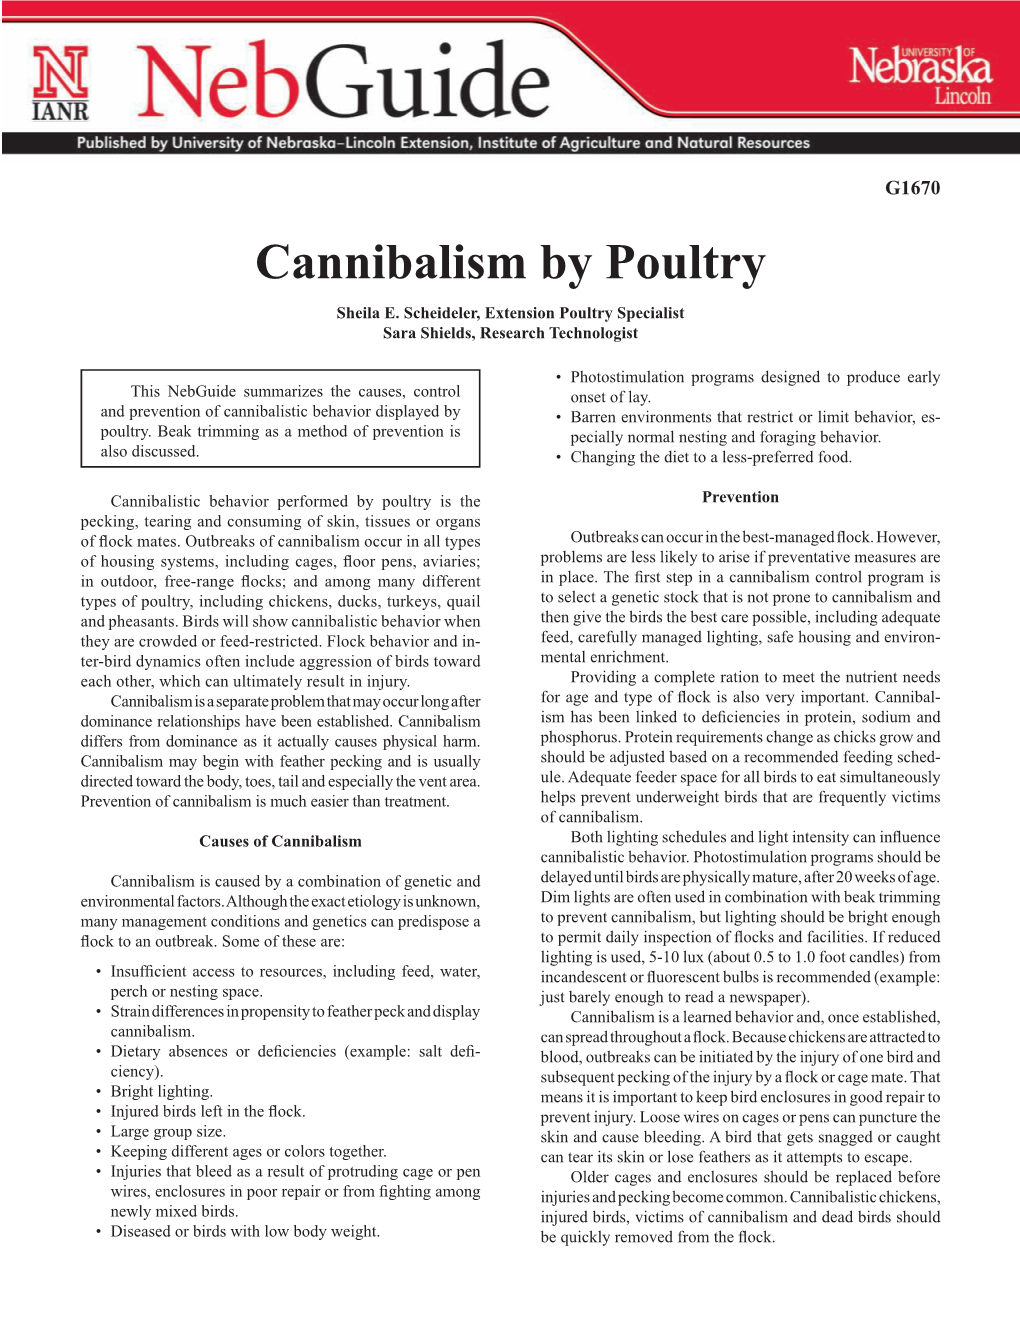 Cannibalism by Poultry Sheila E